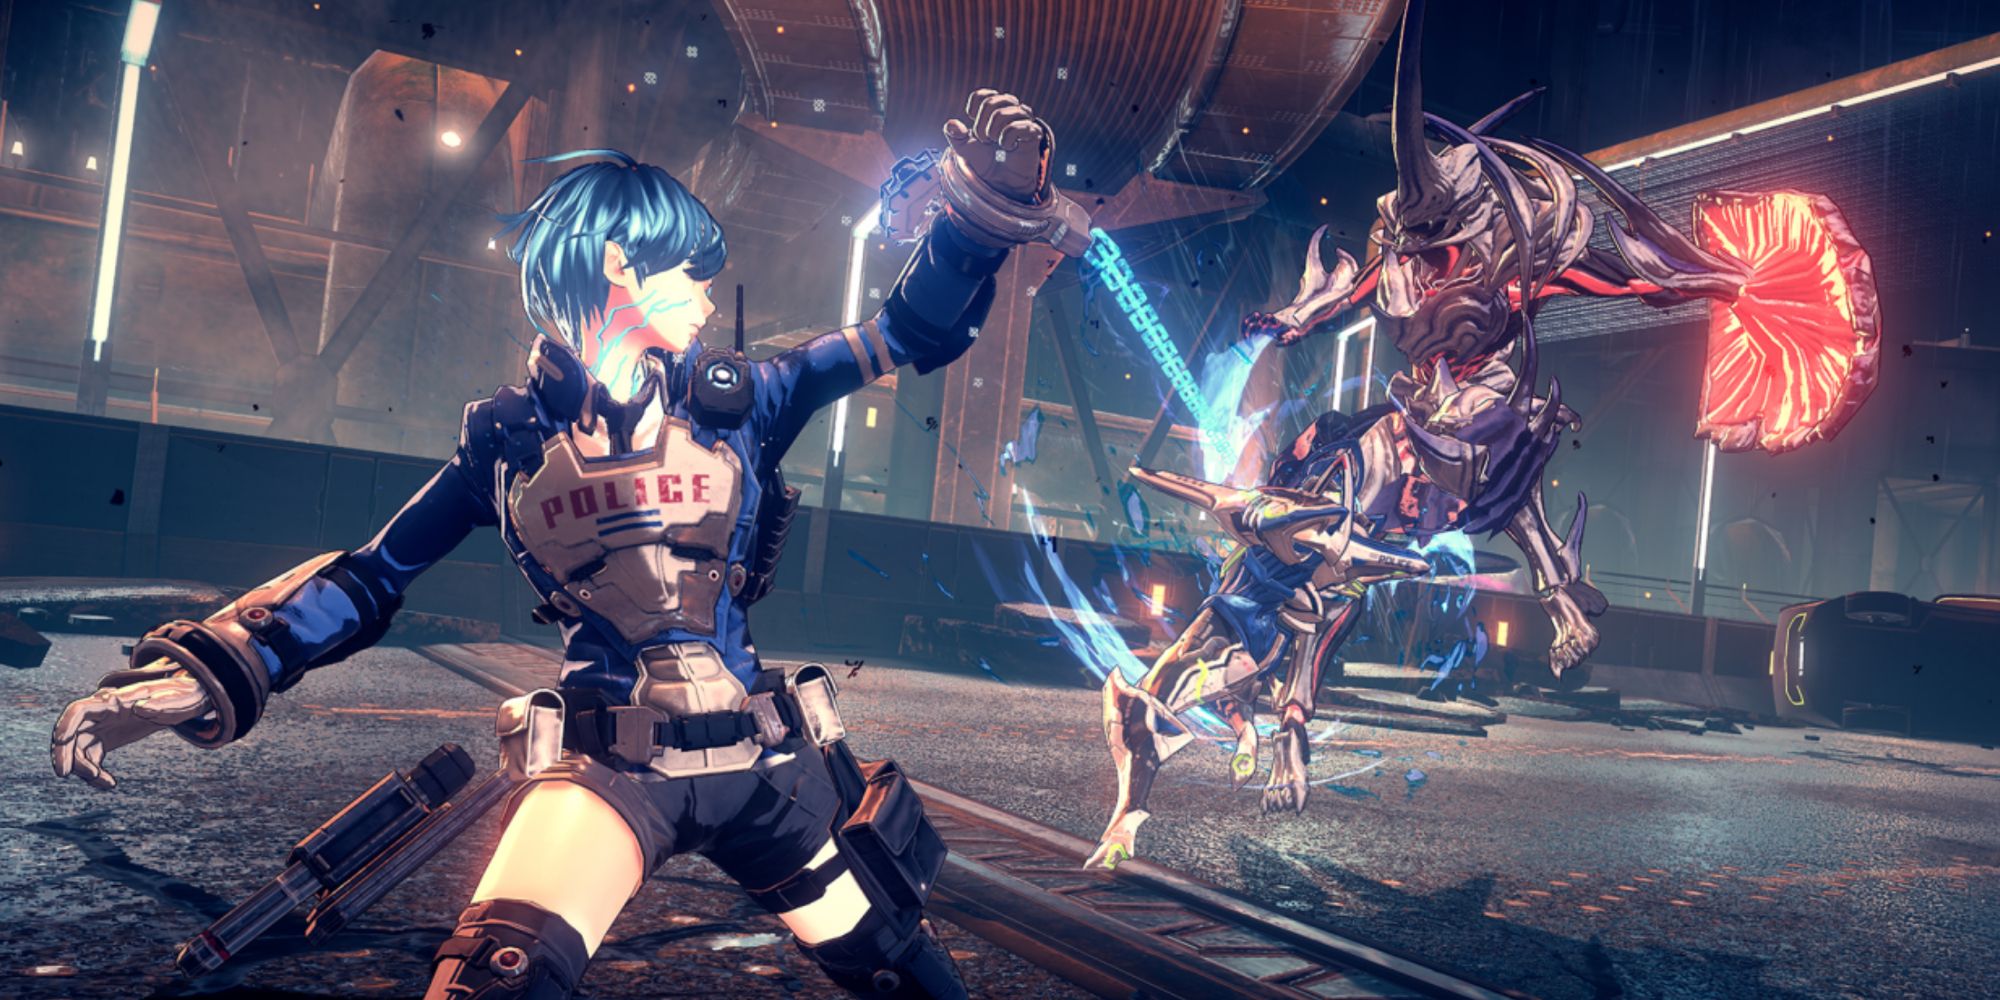 Howard using a Legion in combat in Astral Chain